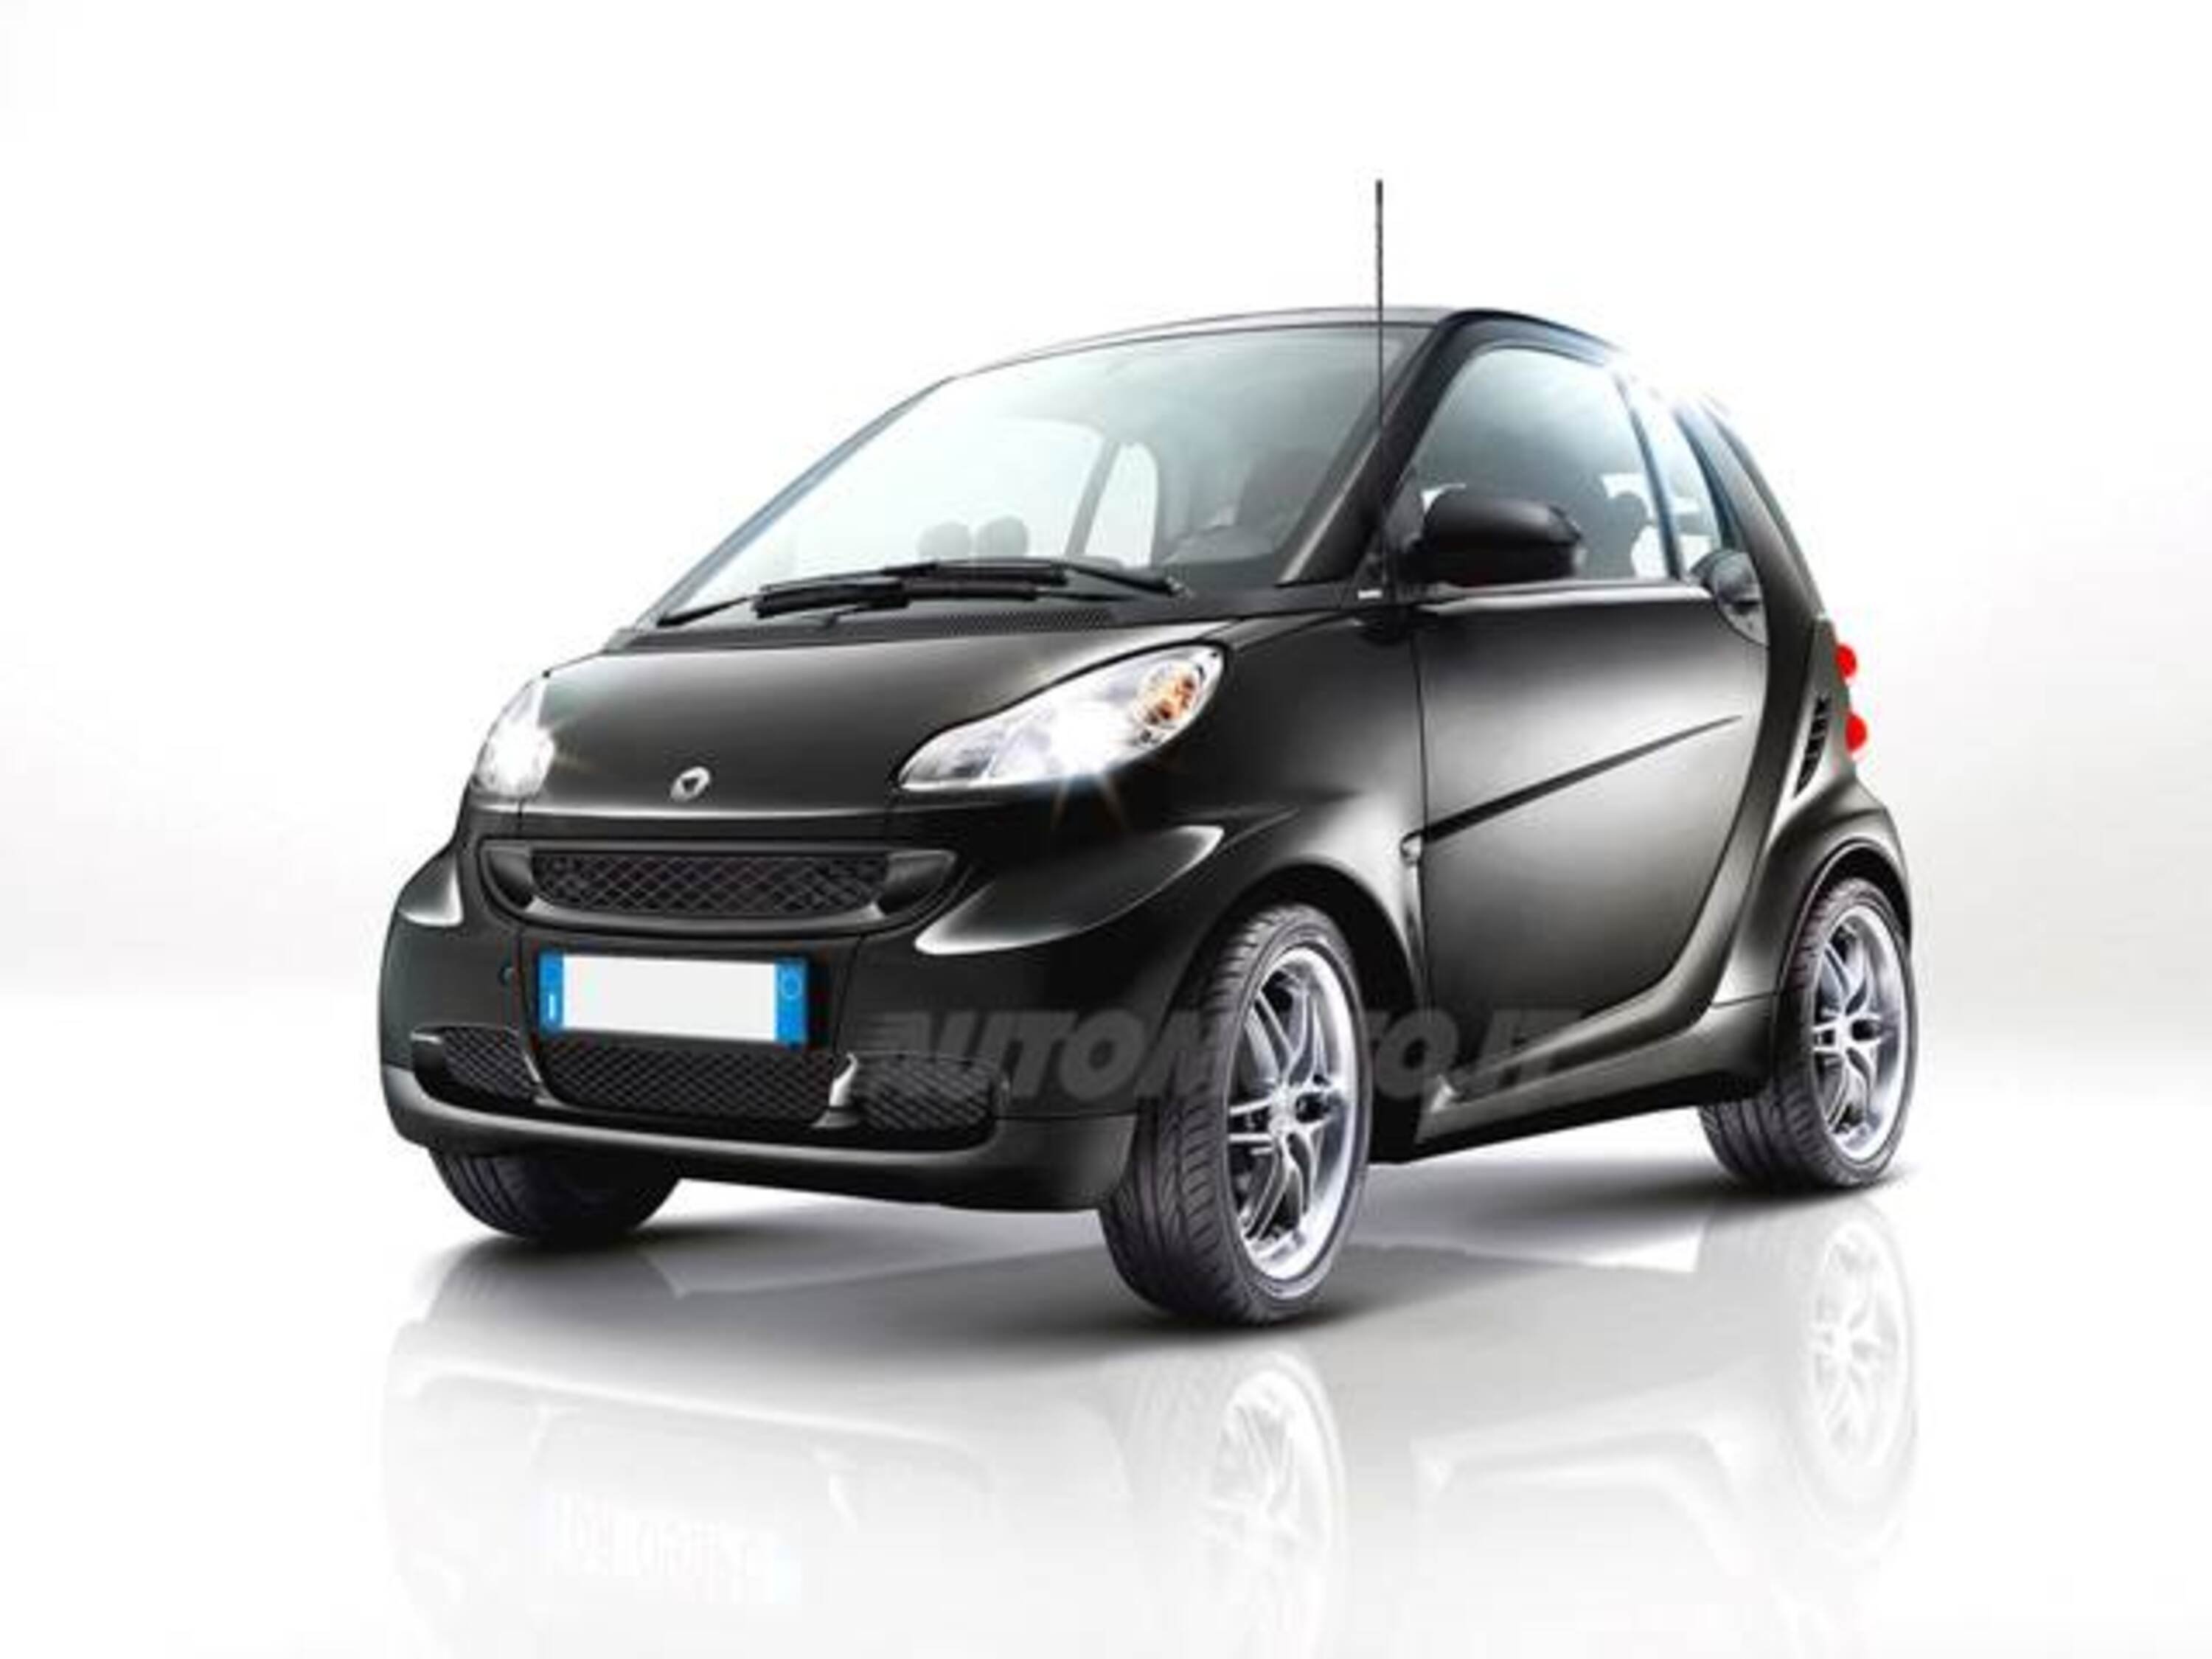 smart Fortwo 800 40 kW coupé teen cdi special edition